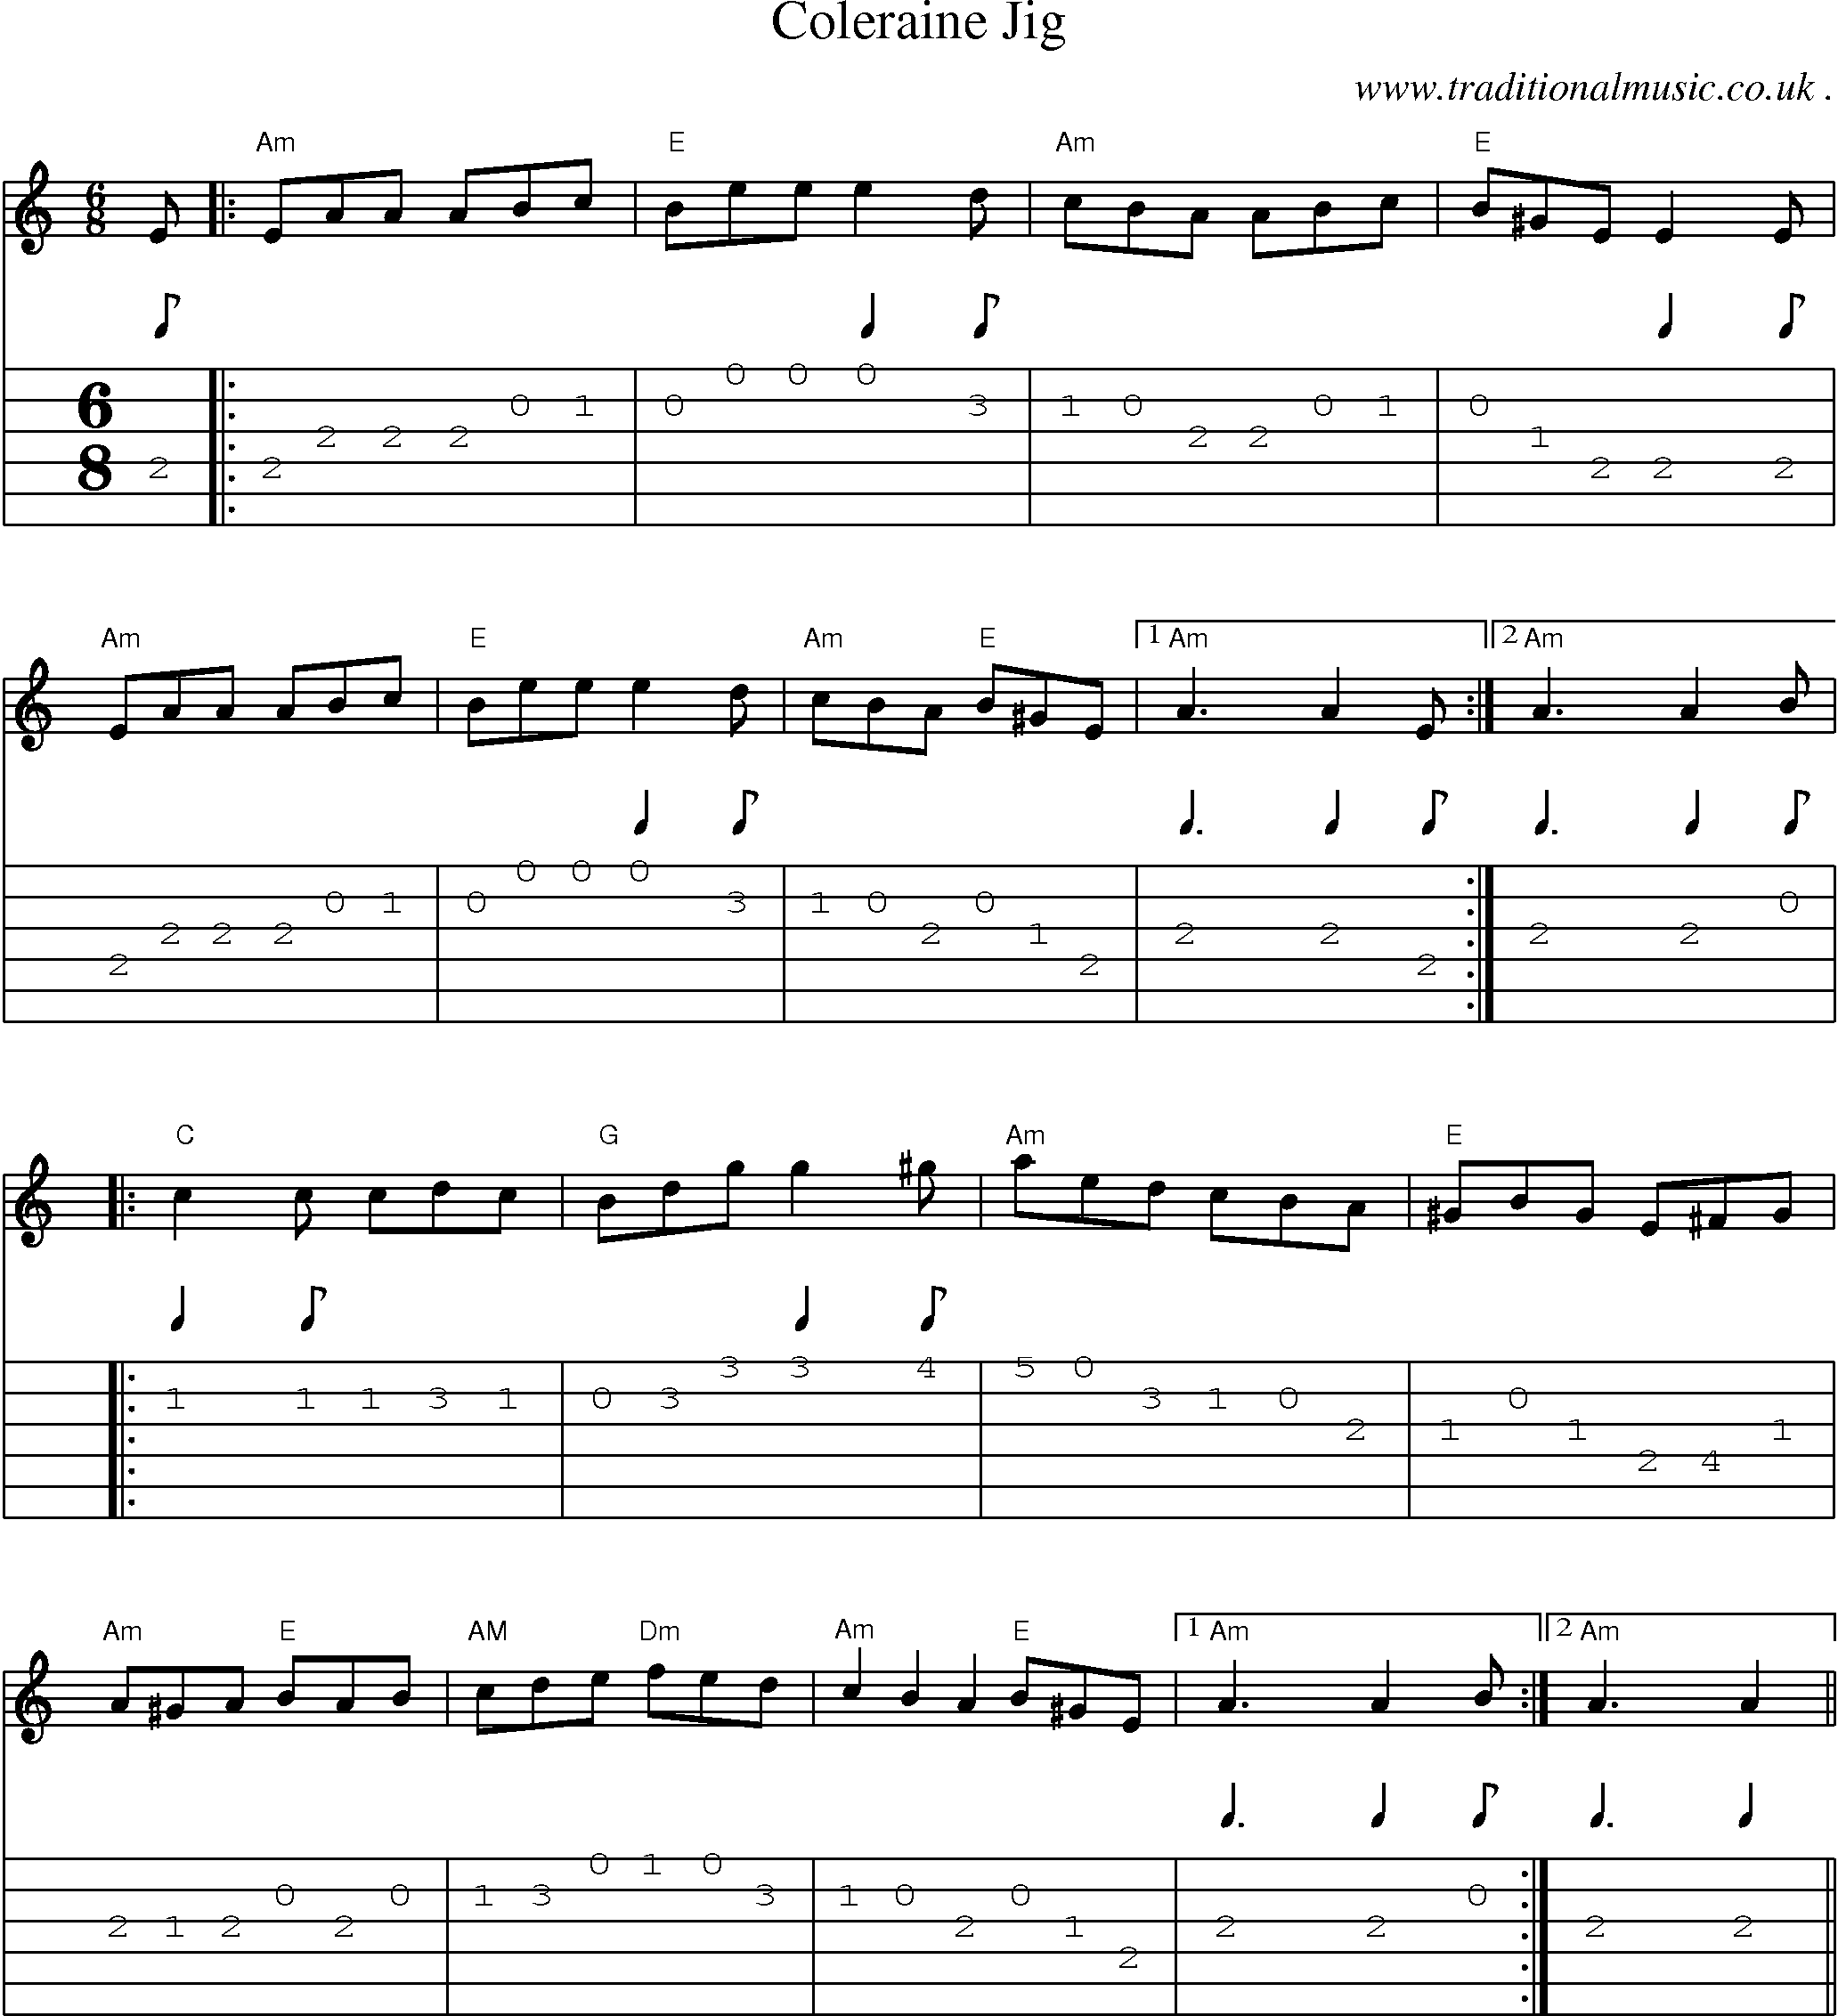 Music Score and Guitar Tabs for Coleraine Jig